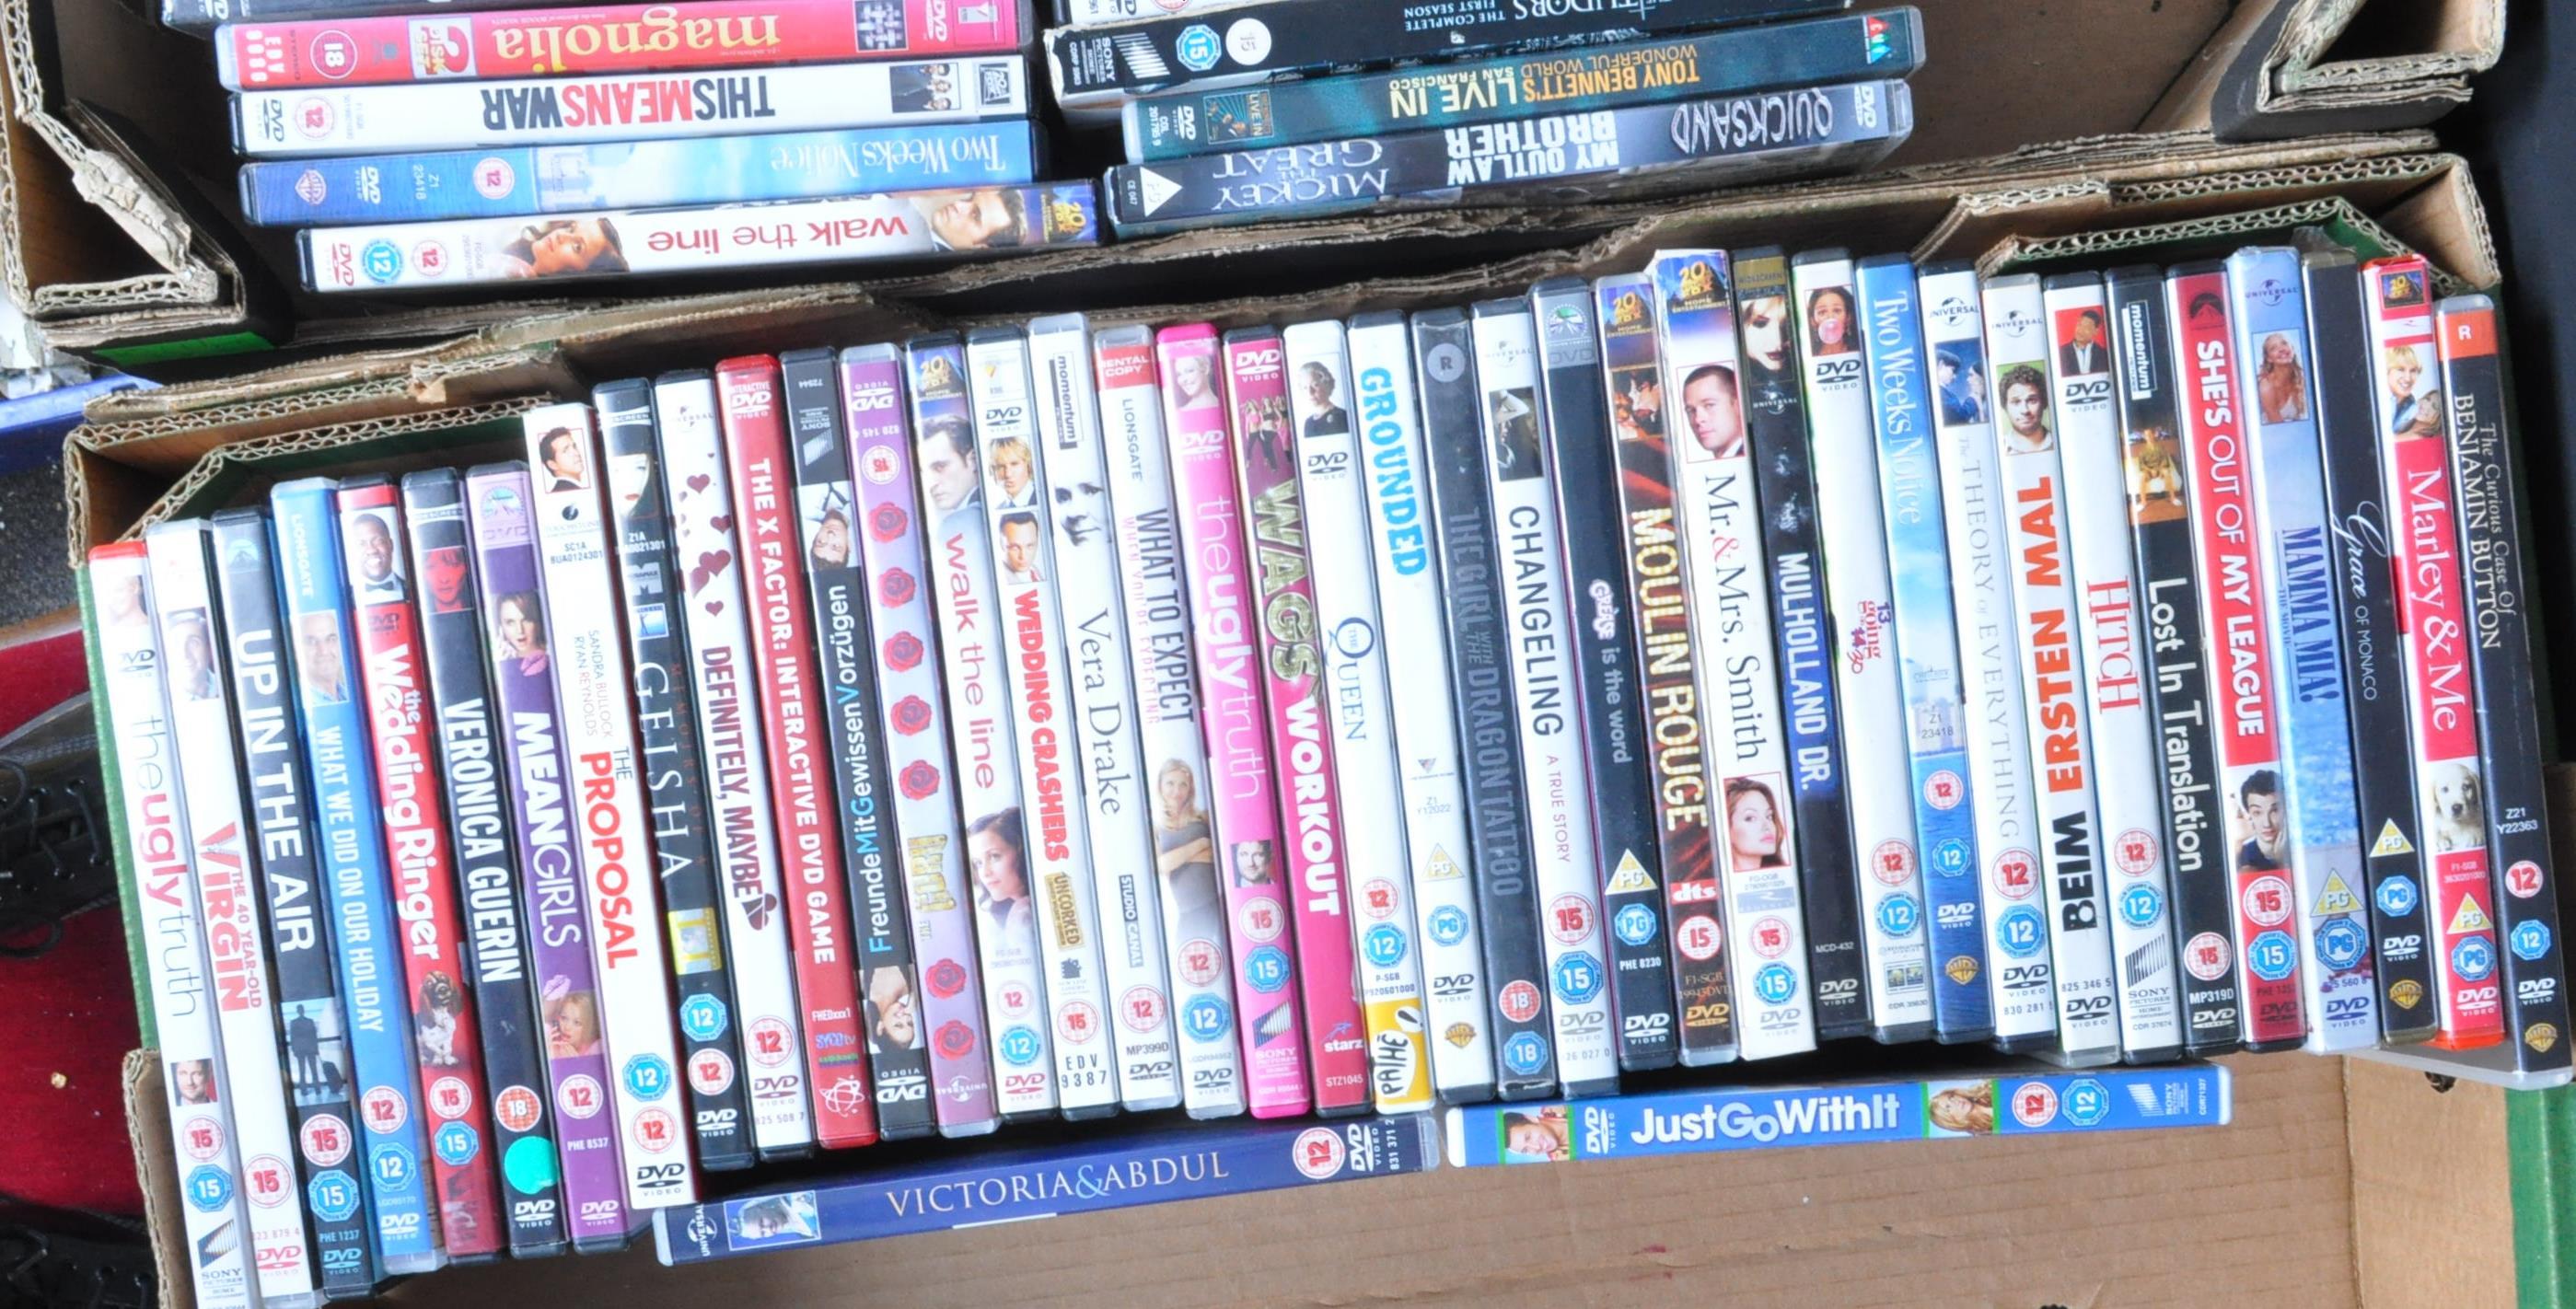 LARGE COLLECTION OF DVD FILMS - 'CHICK FLICK' GENRE & MORE - Image 2 of 3